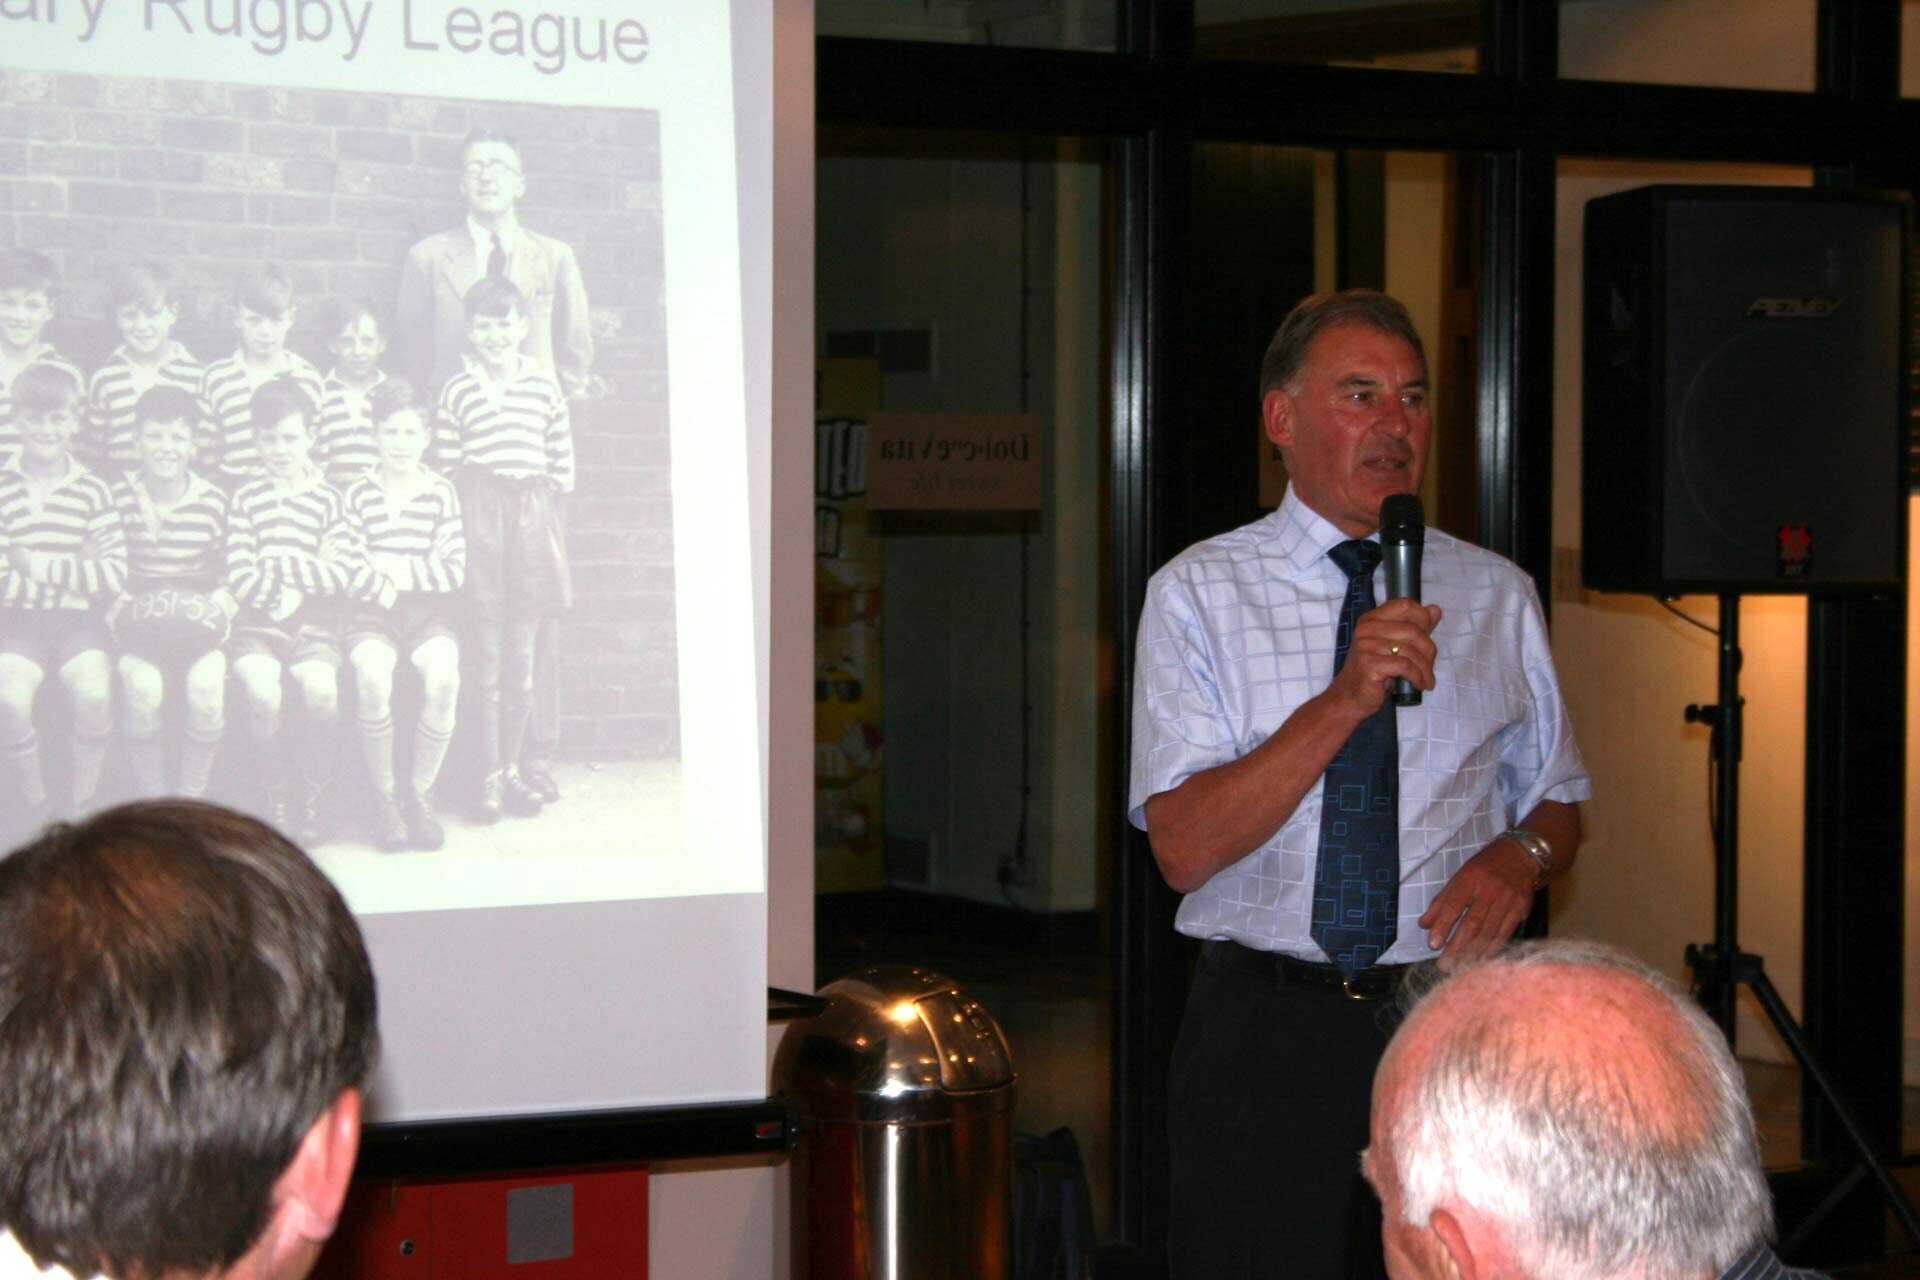 Mike speaking at the football dinner in 2007